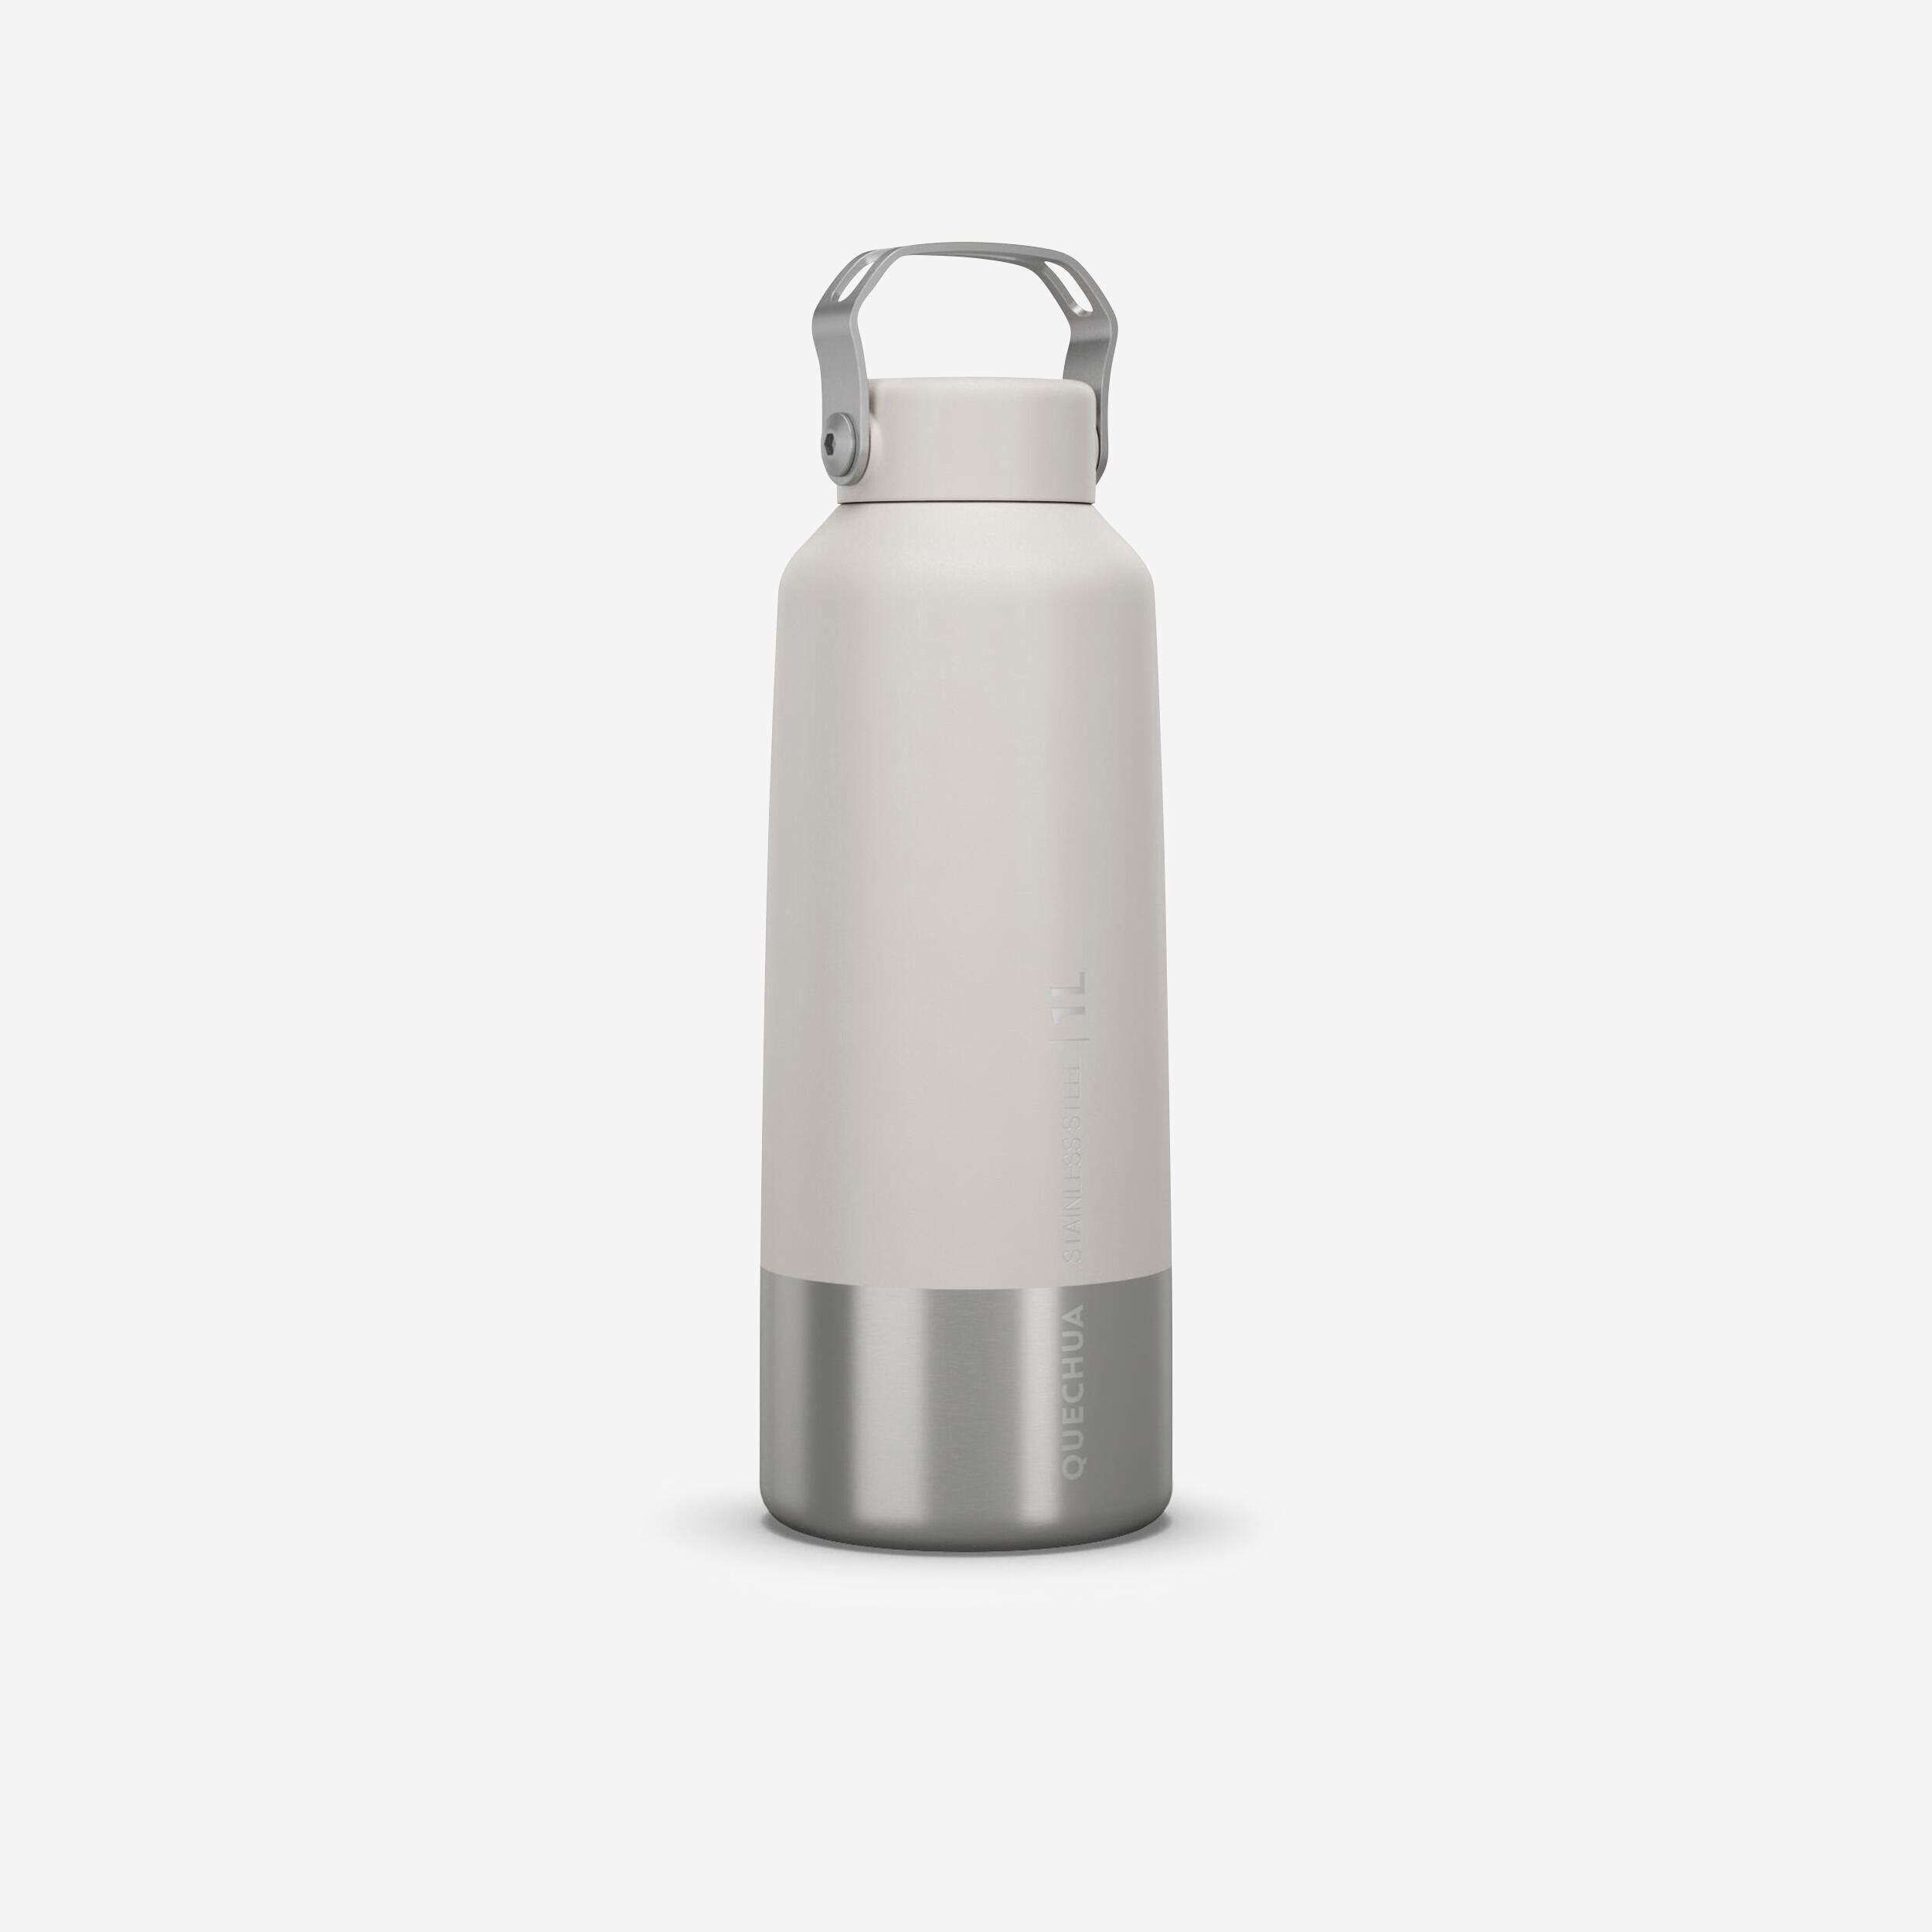 QUECHUA 1 L stainless steel flask with screw cap for hiking - White